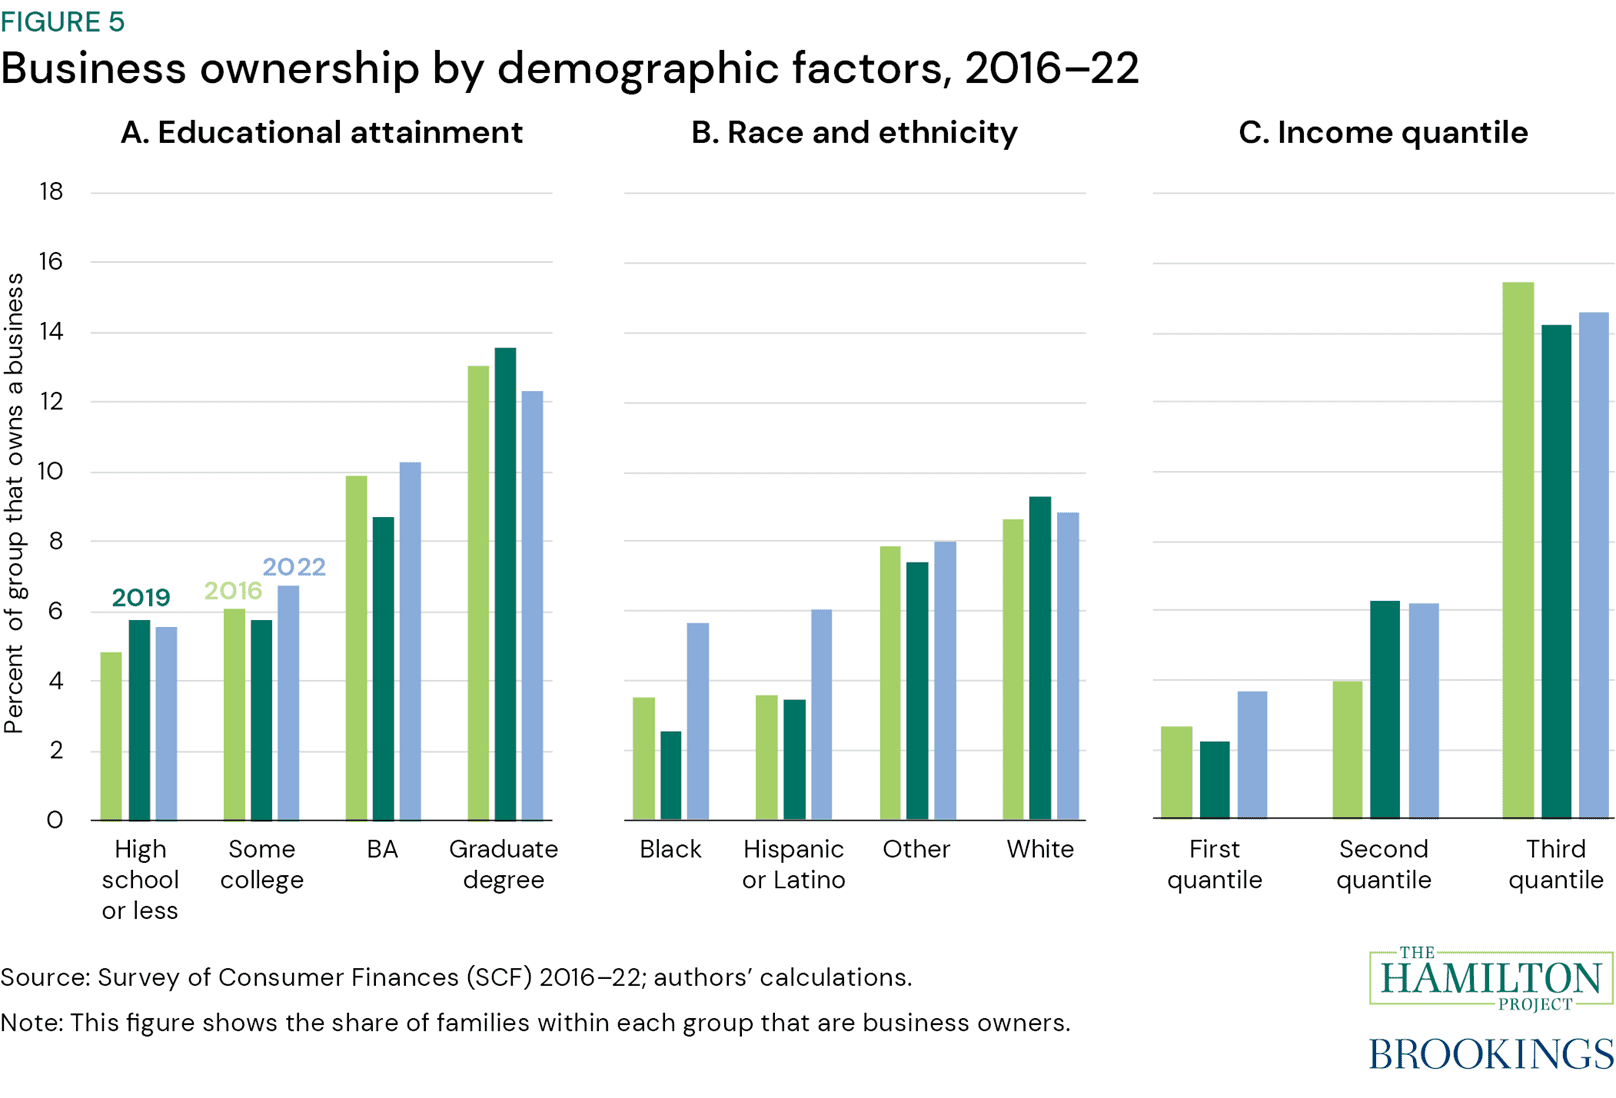 Figure 5: Business ownership by demographic factors, 2016-22. 